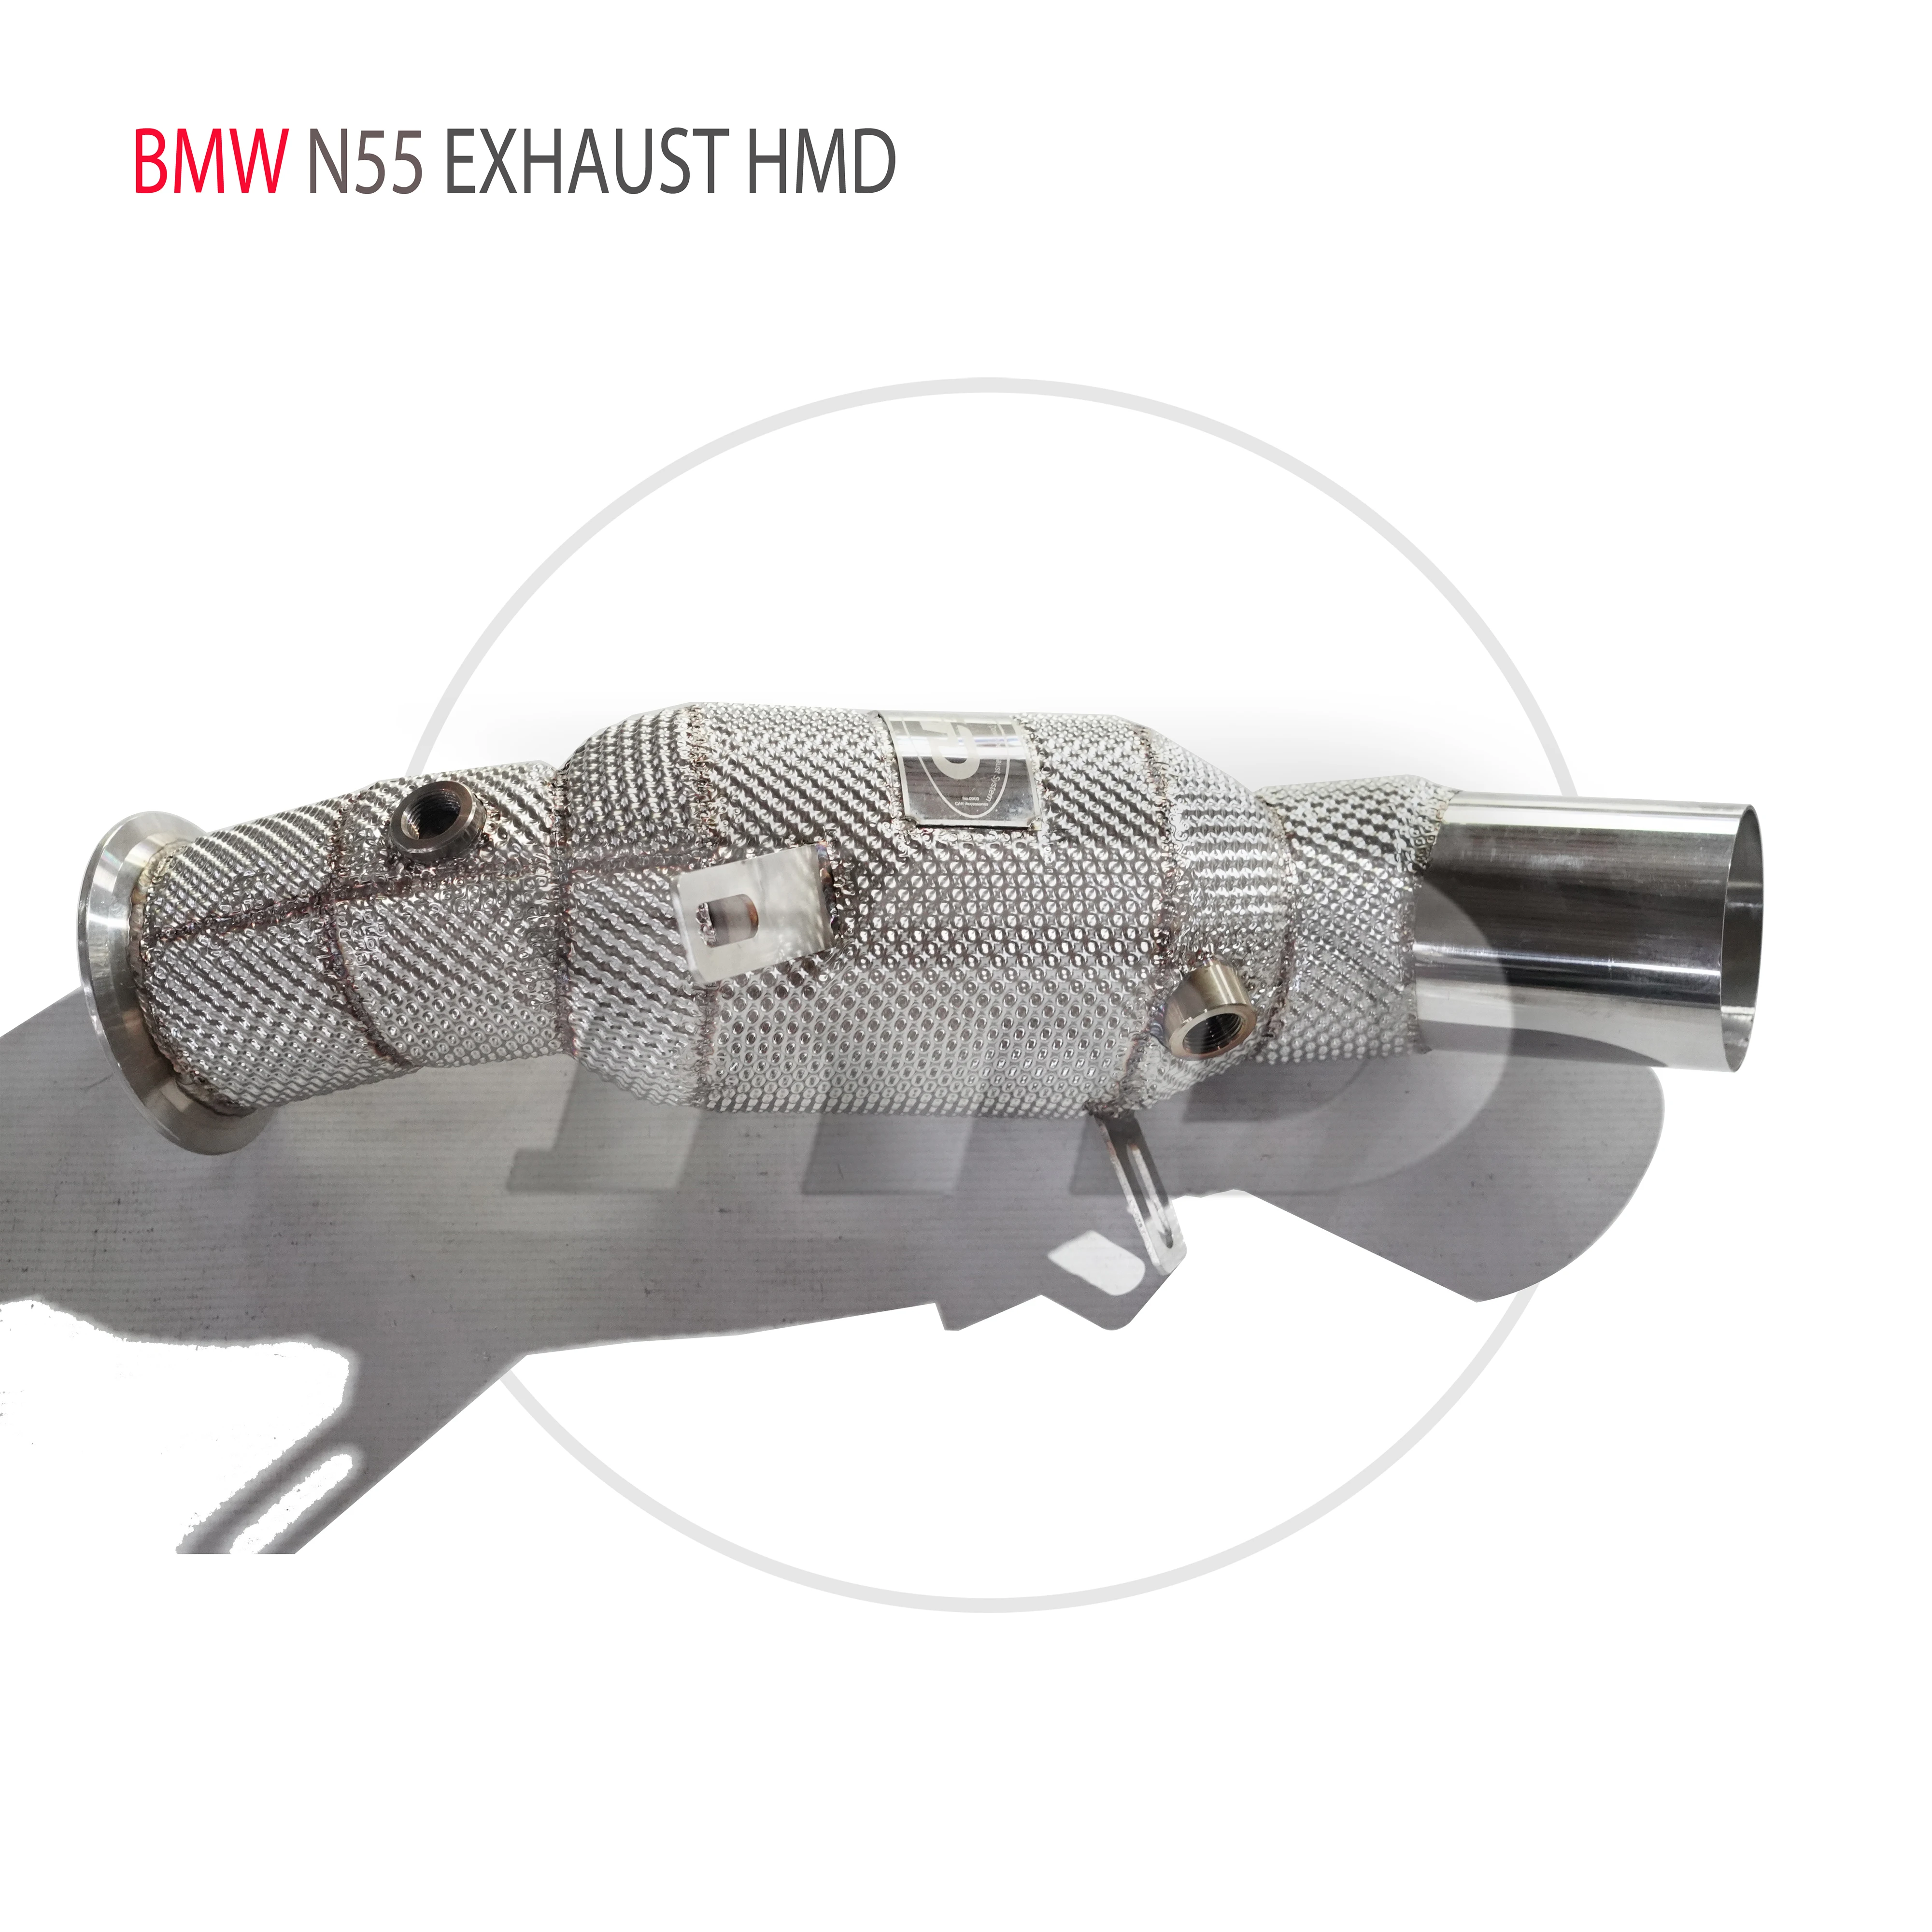 

HMD Car Accessories Exhaust System High Flow Performance Downpipe for BMW 535i F18 N55 With Catalytic Converter